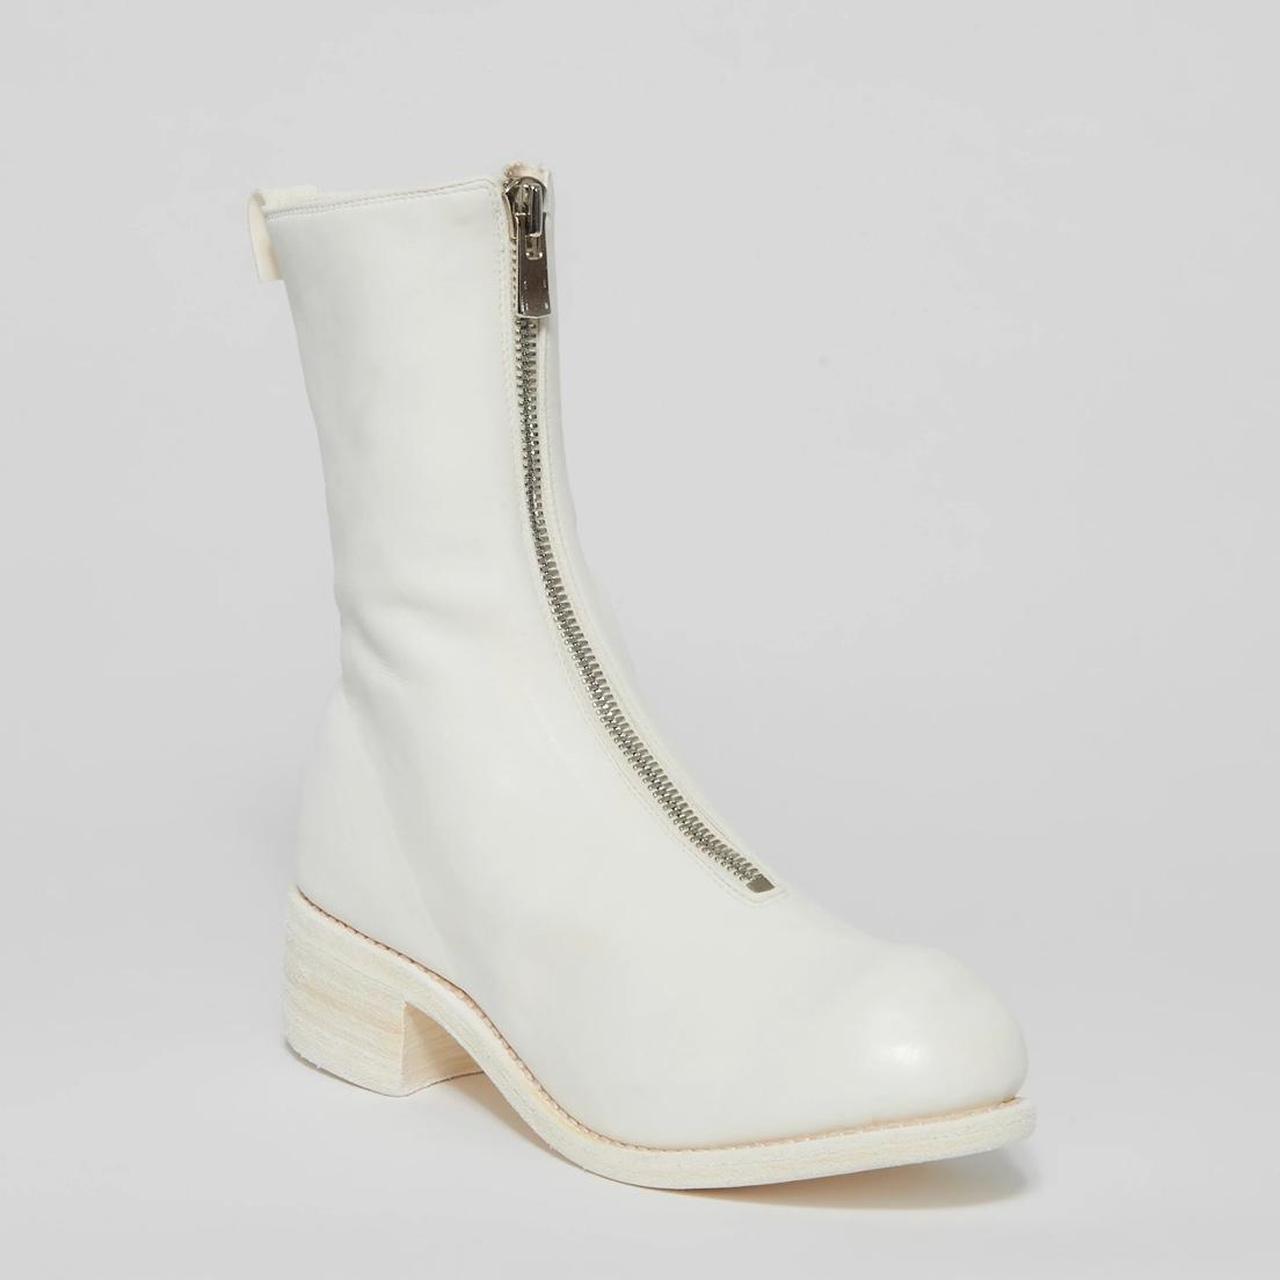 Product Image 1 - WHITE GUIDI BOOTS WITH ZIPPER!

Excellent